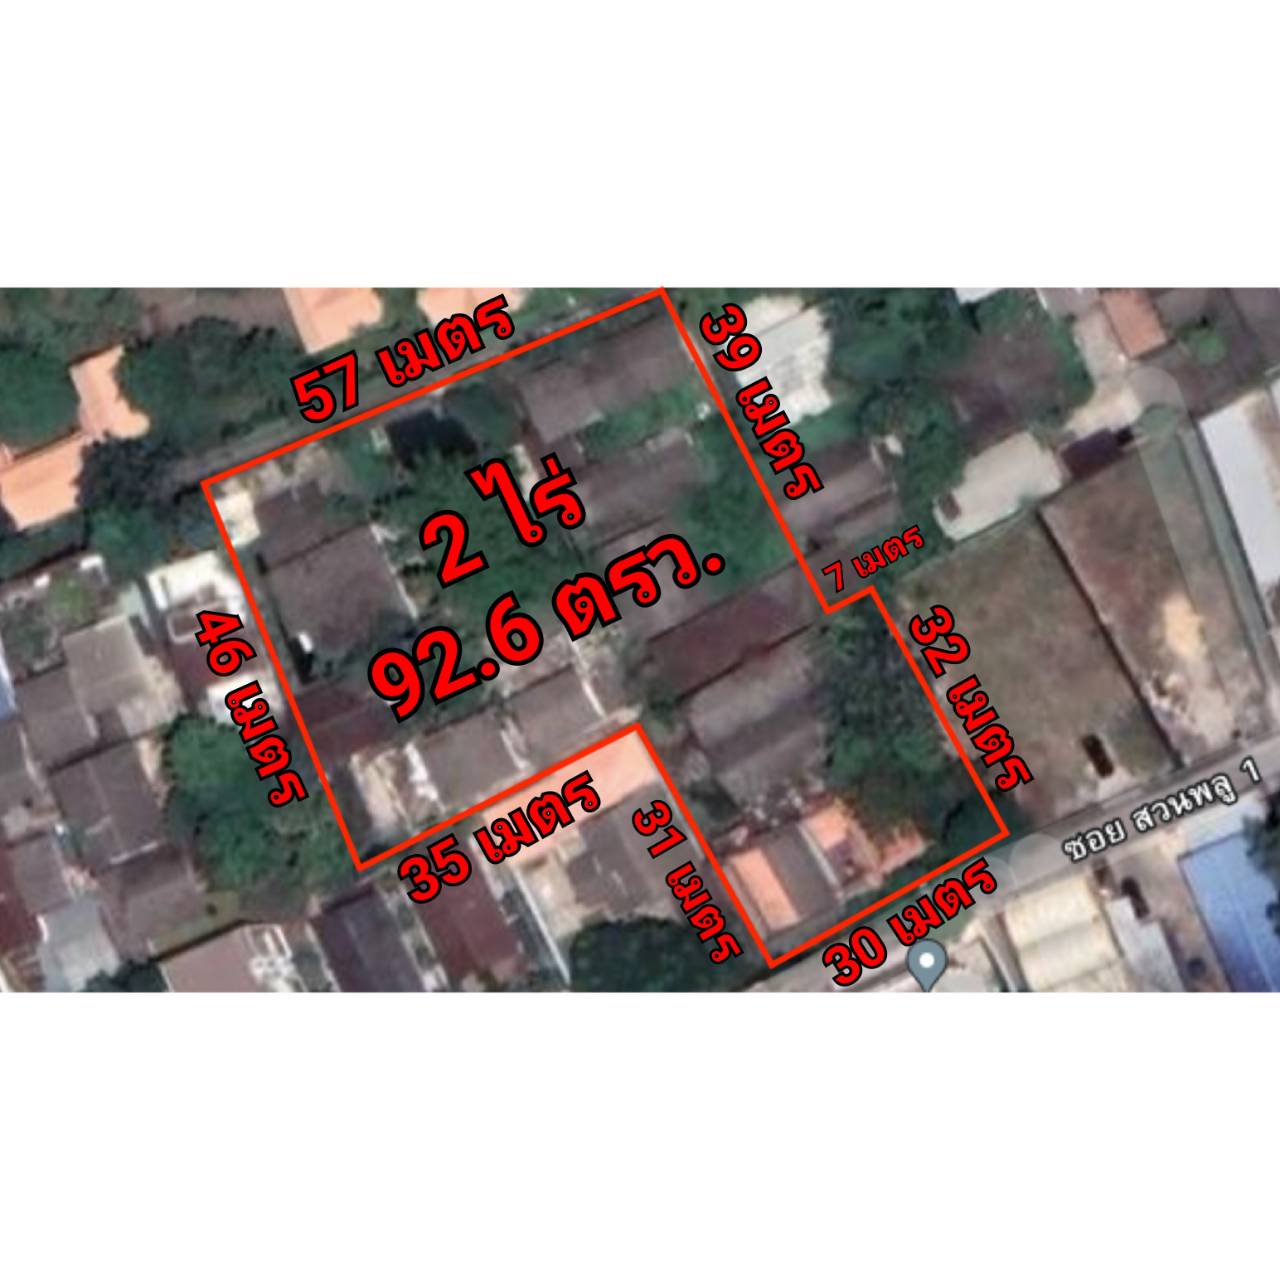 Ultra Rare Impossible To Find Land over 2 Rai for SALE at Suan Phlu 1 at Just 225,000 Baht Per Sq.W!! Narathiwas 9, Sathorn 3!! Own it before a Renown Developer makes a move!!